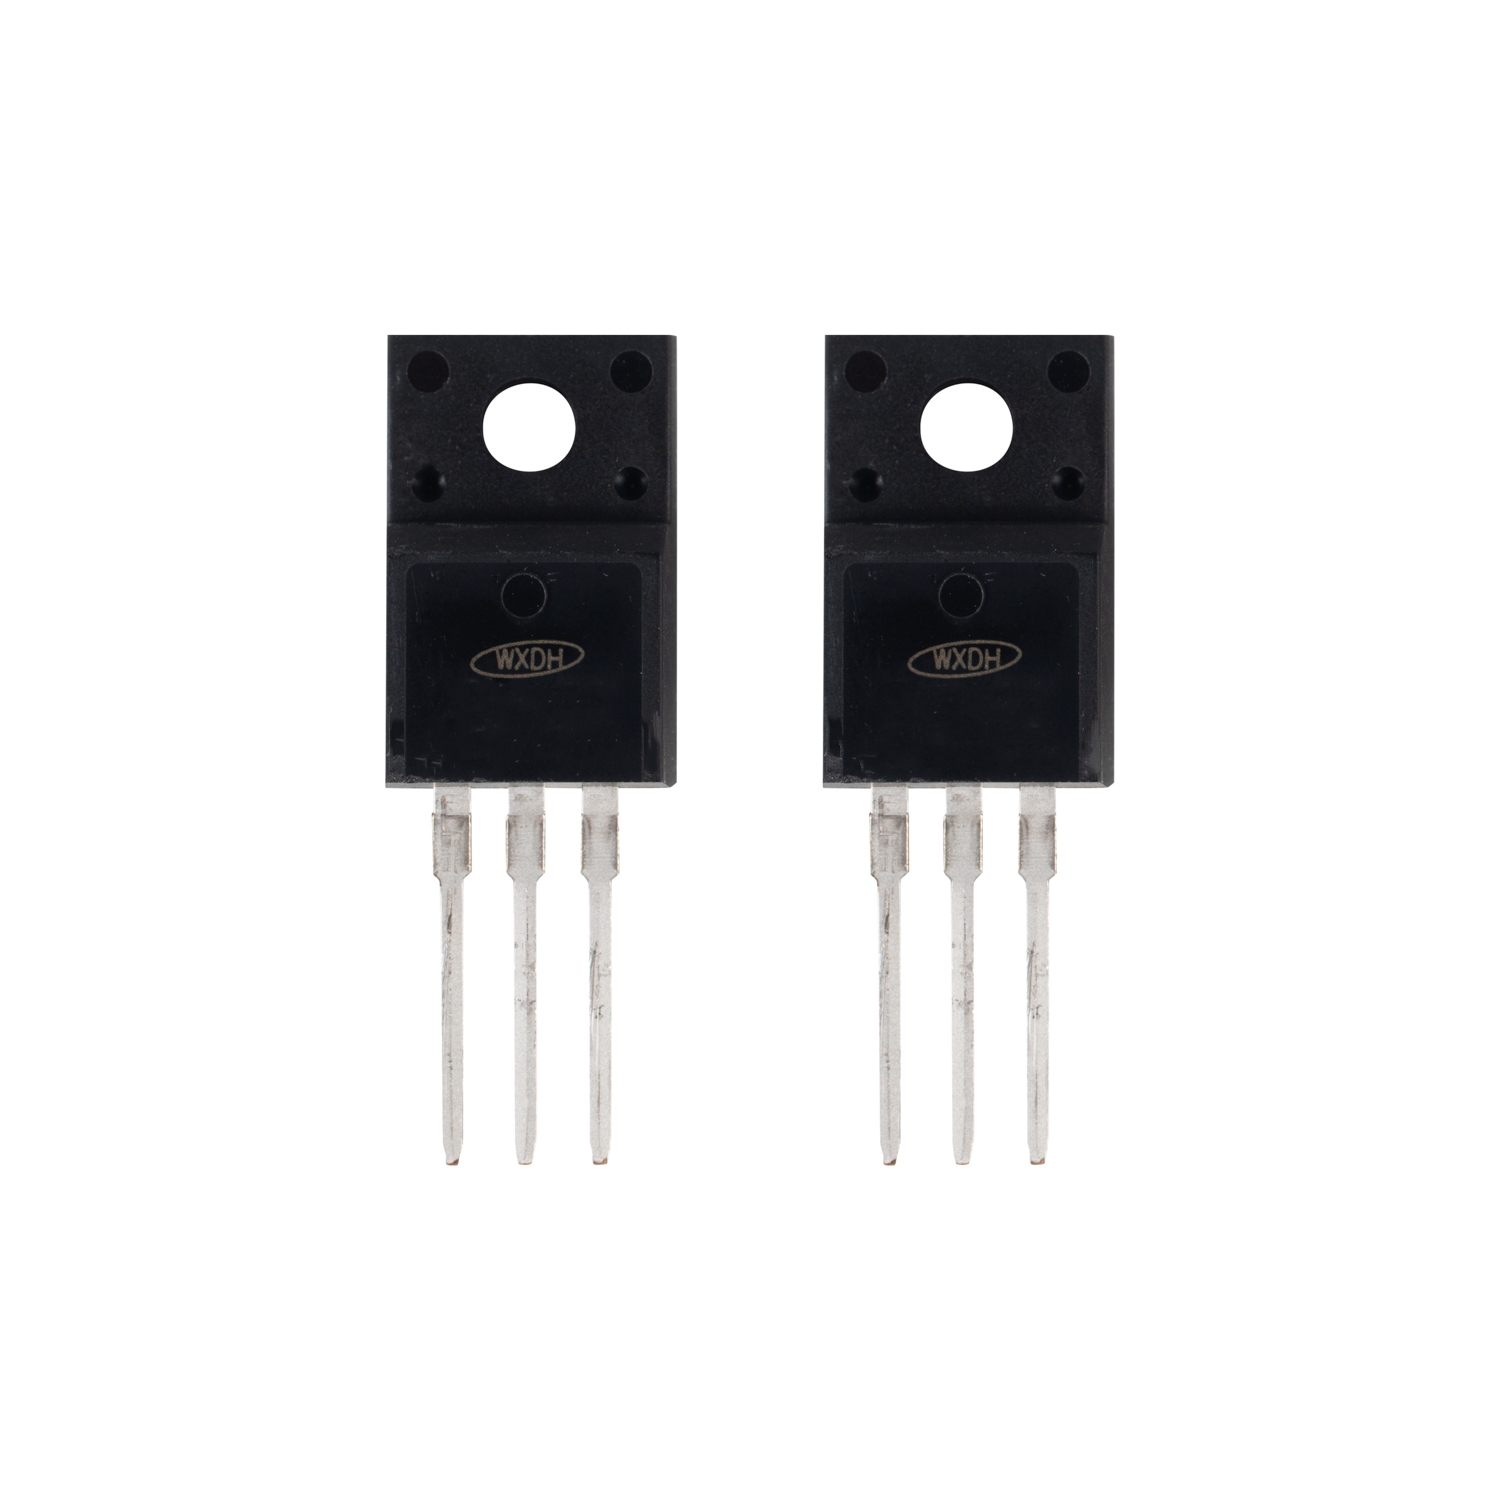 105A 150V N-channel Enhancement Mode Power MOSFET